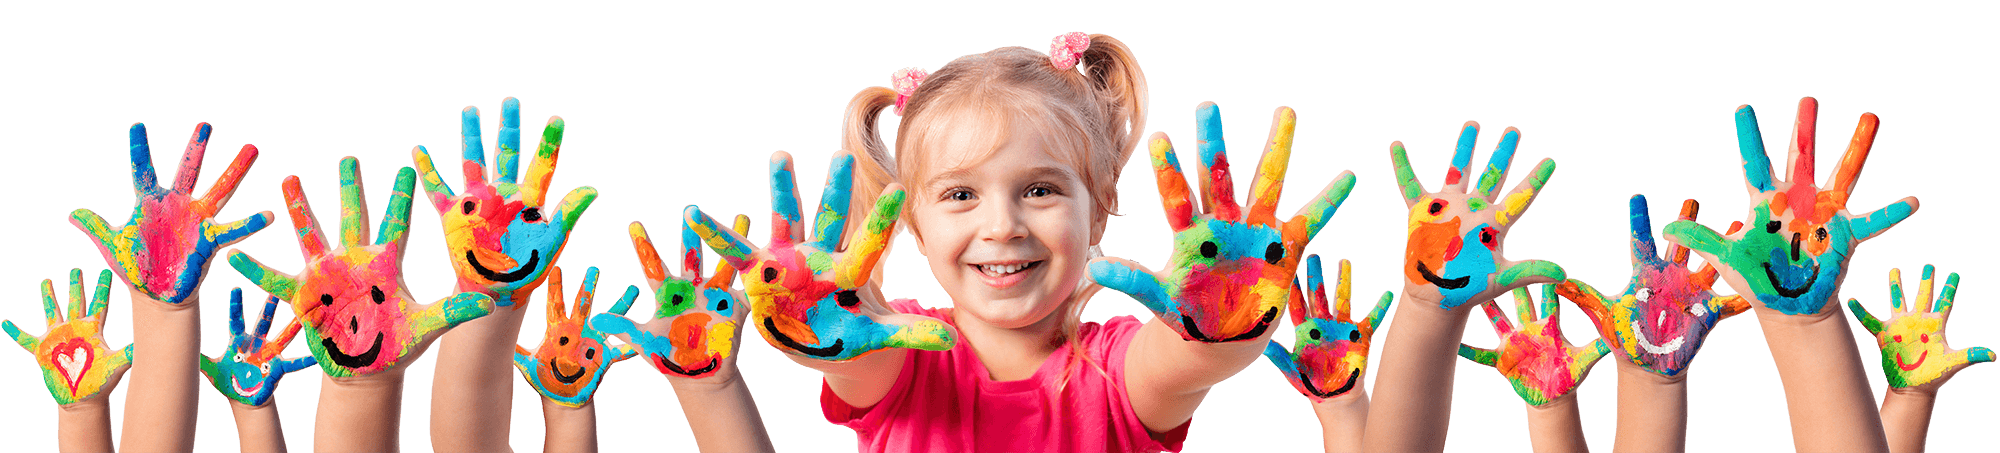 Smiling young girl with paint on her hands